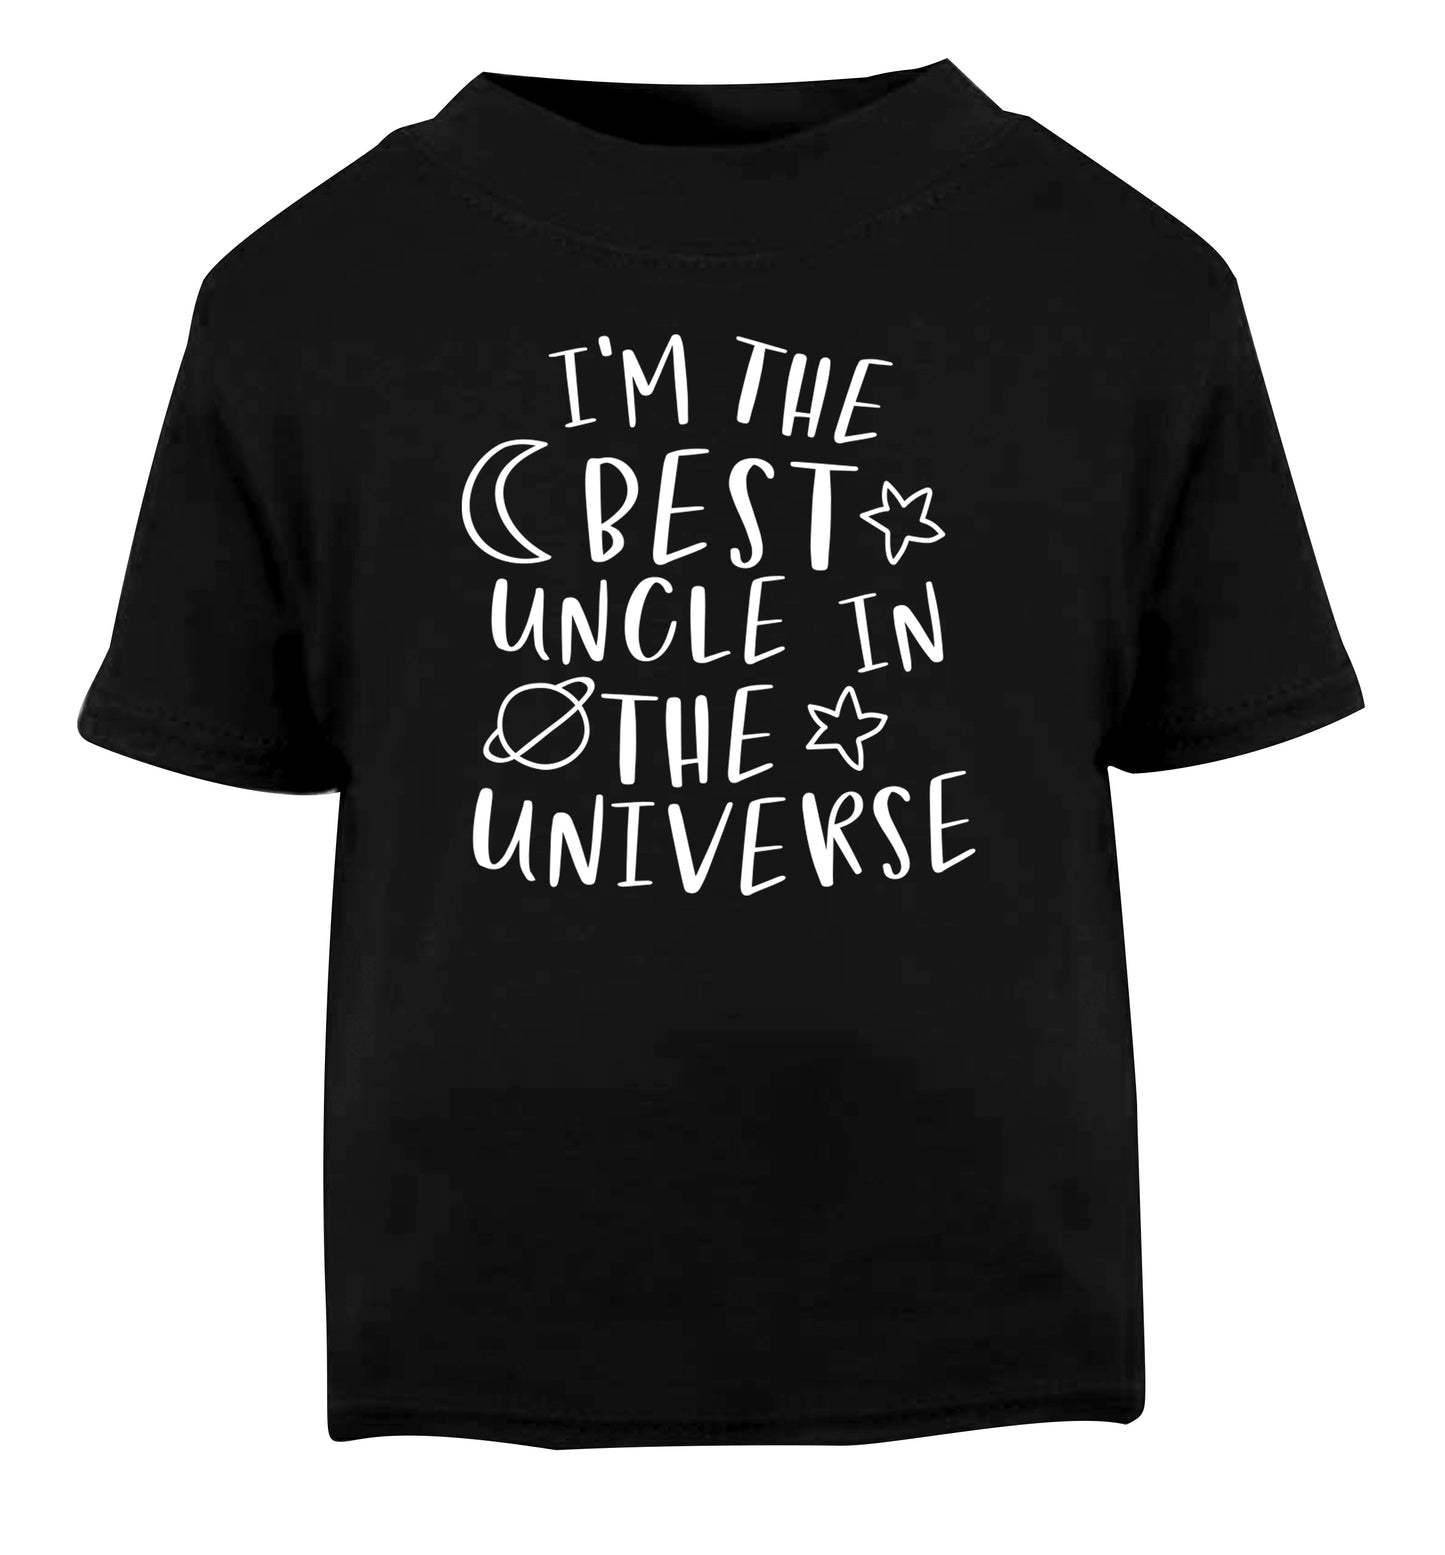 I'm the best uncle in the universe Black Baby Toddler Tshirt 2 years